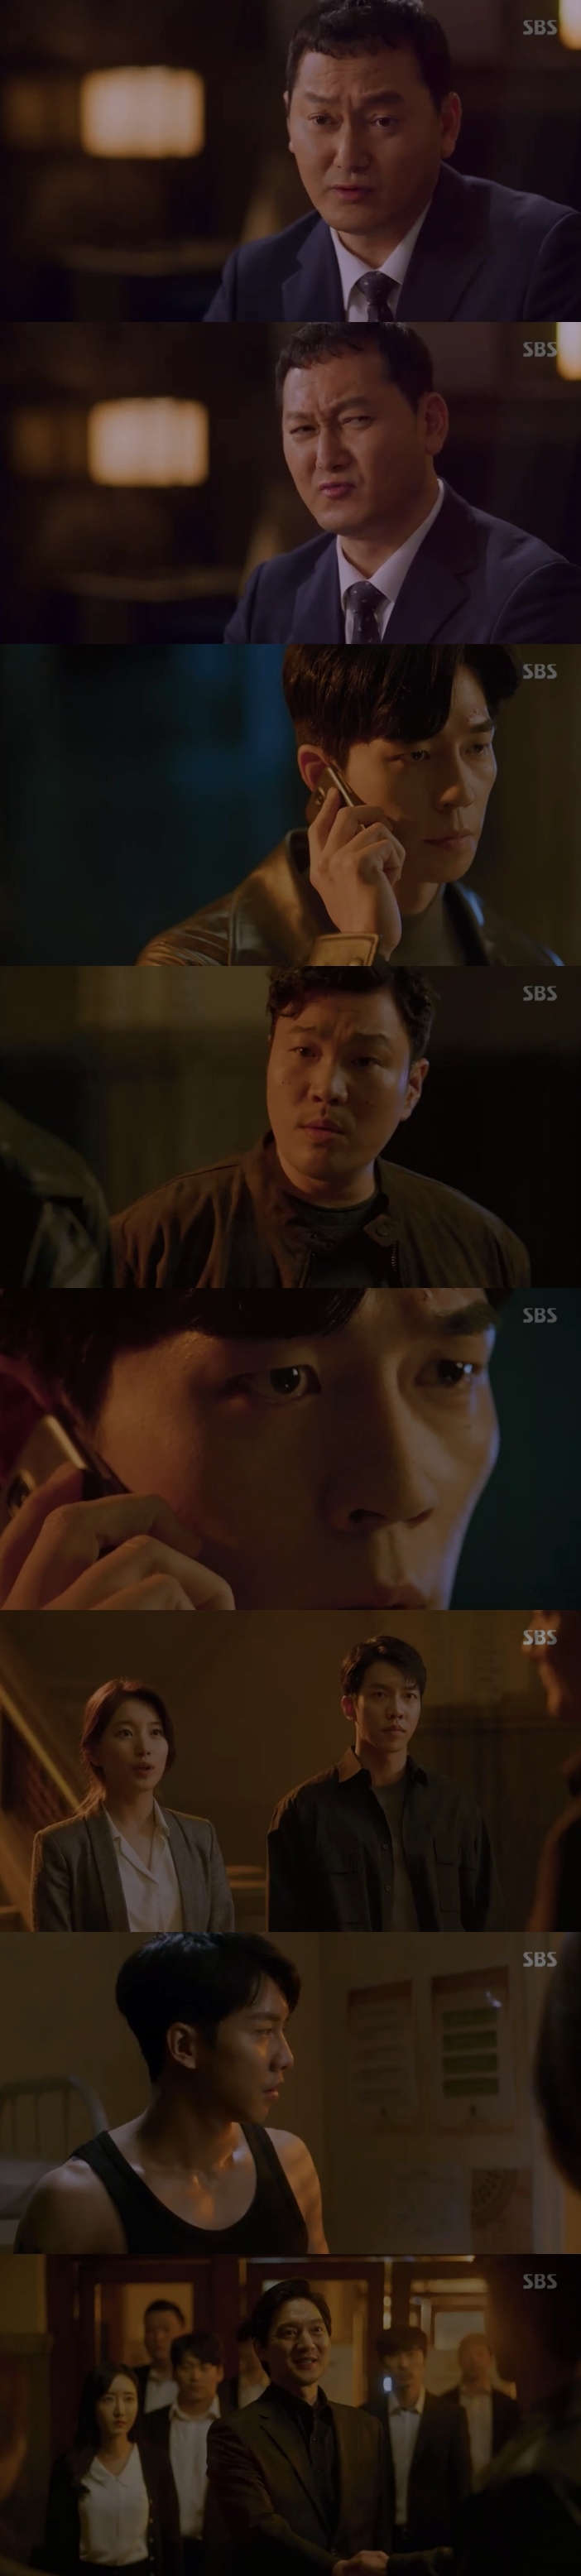 Jung Man-sik asked to kill Jang Hyuk-jin and Lee Seung-gi.In the SBS gilt drama Vagabond broadcast on the 18th, a video of Min Jae-sik sending a support team to kill Kim Song Yuqi (Jang Hyuk-jin) and Lee Seung-gi was broadcast.You know Im the best in the blacks, right? The fate of the organization depends on you. Kim Song Yuqi, remove the chadal gun, Min said to the support team.Min Jae-sik, in particular, ordered Ki Tae-woong (Shin Sung-rok) and Gohari (Bae-ji) to kill all the buds if they are disturbed.=